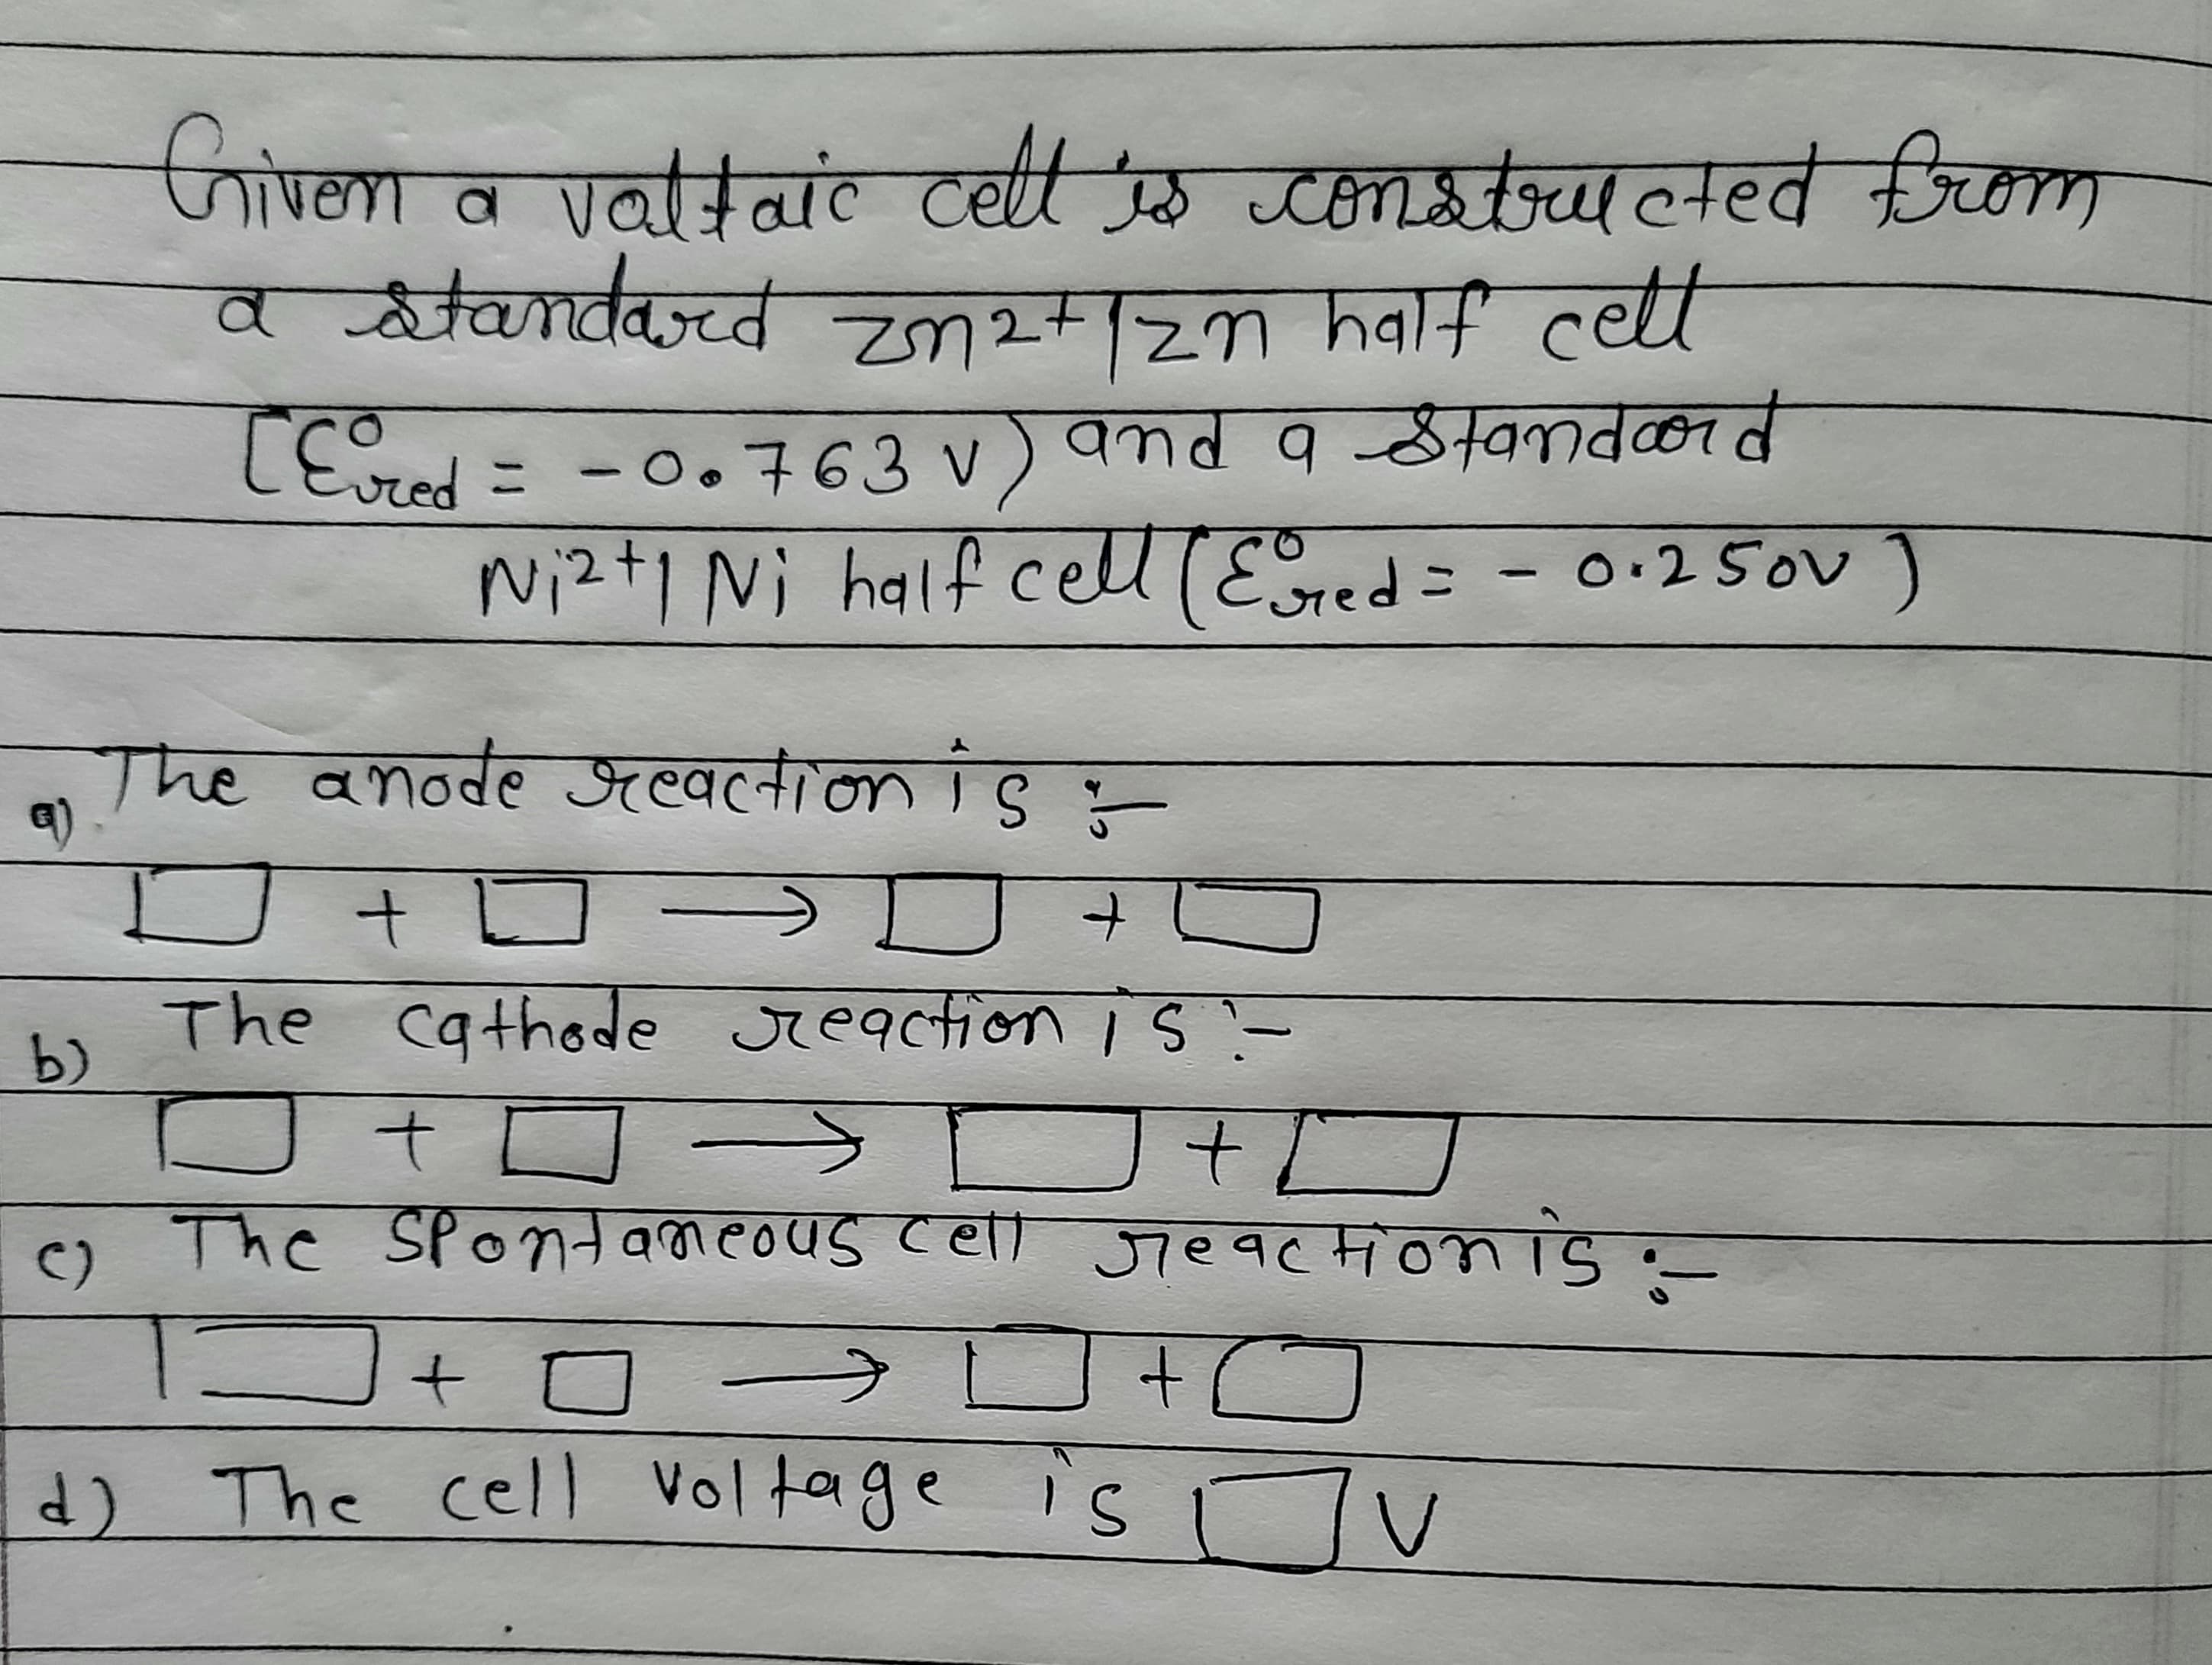 Grivern
a valtaic
cettts constrateted from
a atandard +zn half cell
LEvred = -0.763 v) and 9tand0rd
cell(Ered:
Nizt1 Ni half
- 0:25oV )
Twe वnode সल्वत्नतान ।8 -
The cathode reactionIS-
b)
t.
The Spontameous cell Jieaction is
C)
d) The cell Voltage is Tv
